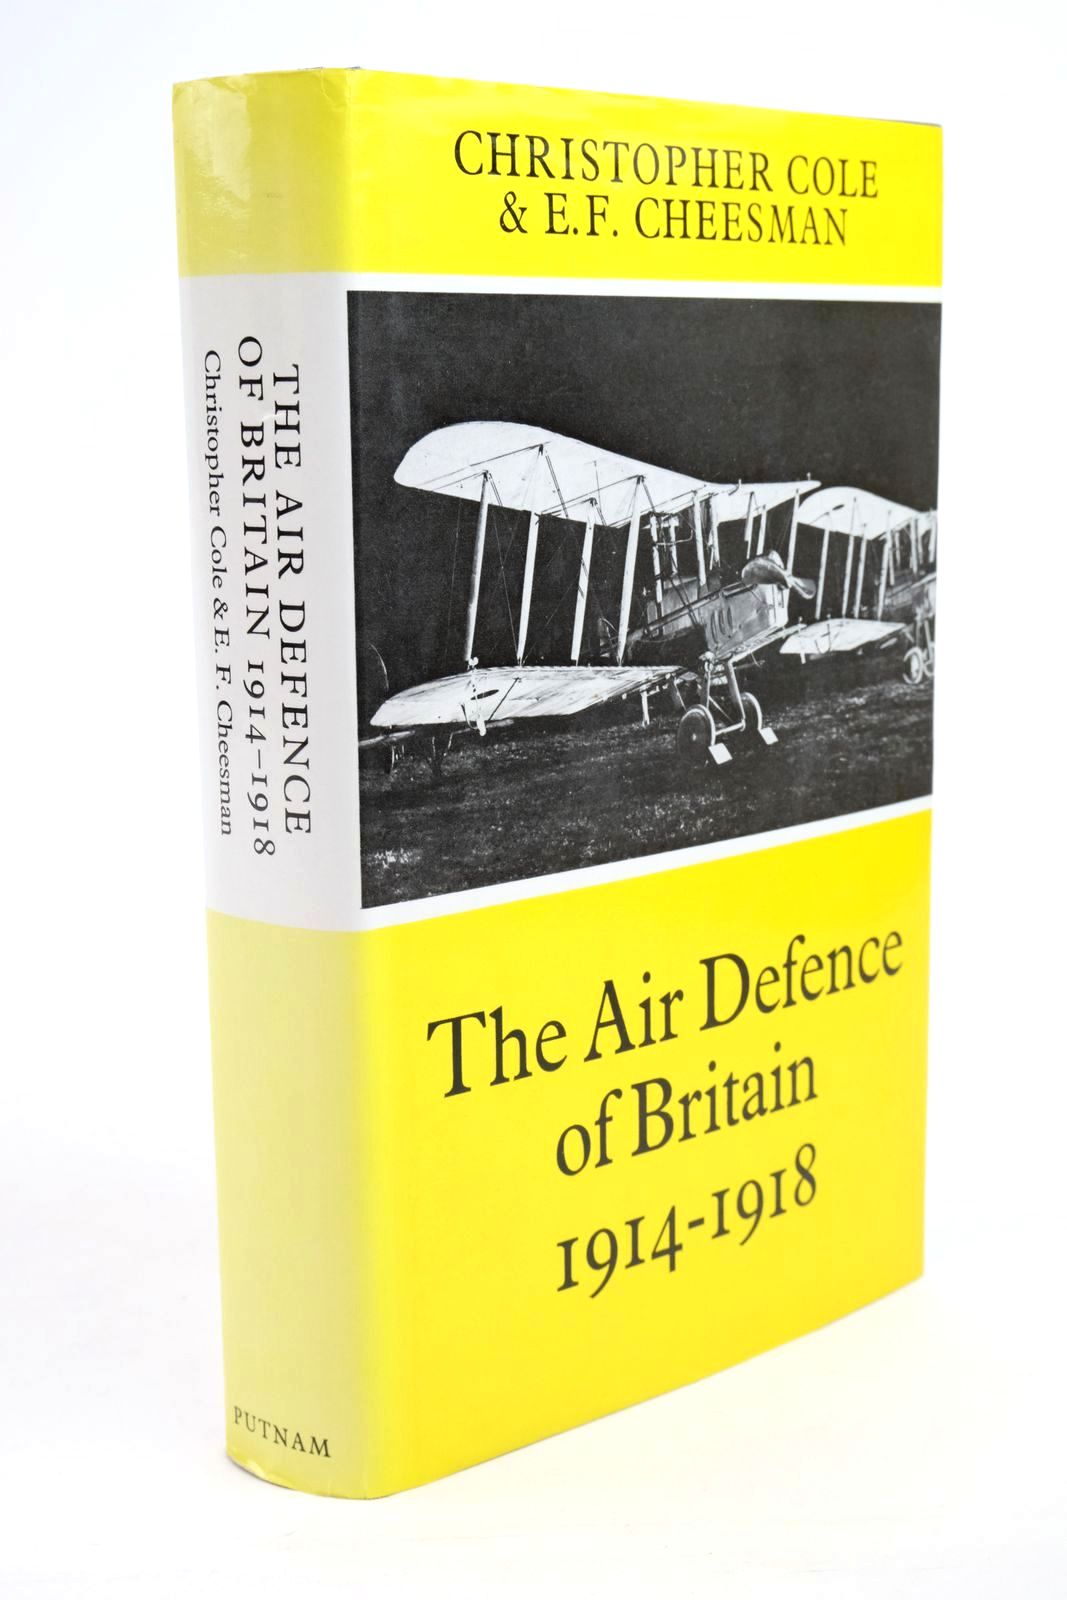 Photo of THE AIR DEFENCE OF BRITAIN 1914-1918 written by Cole, Christopher Cheesman, E.F. published by Putnam (STOCK CODE: 1322018)  for sale by Stella & Rose's Books